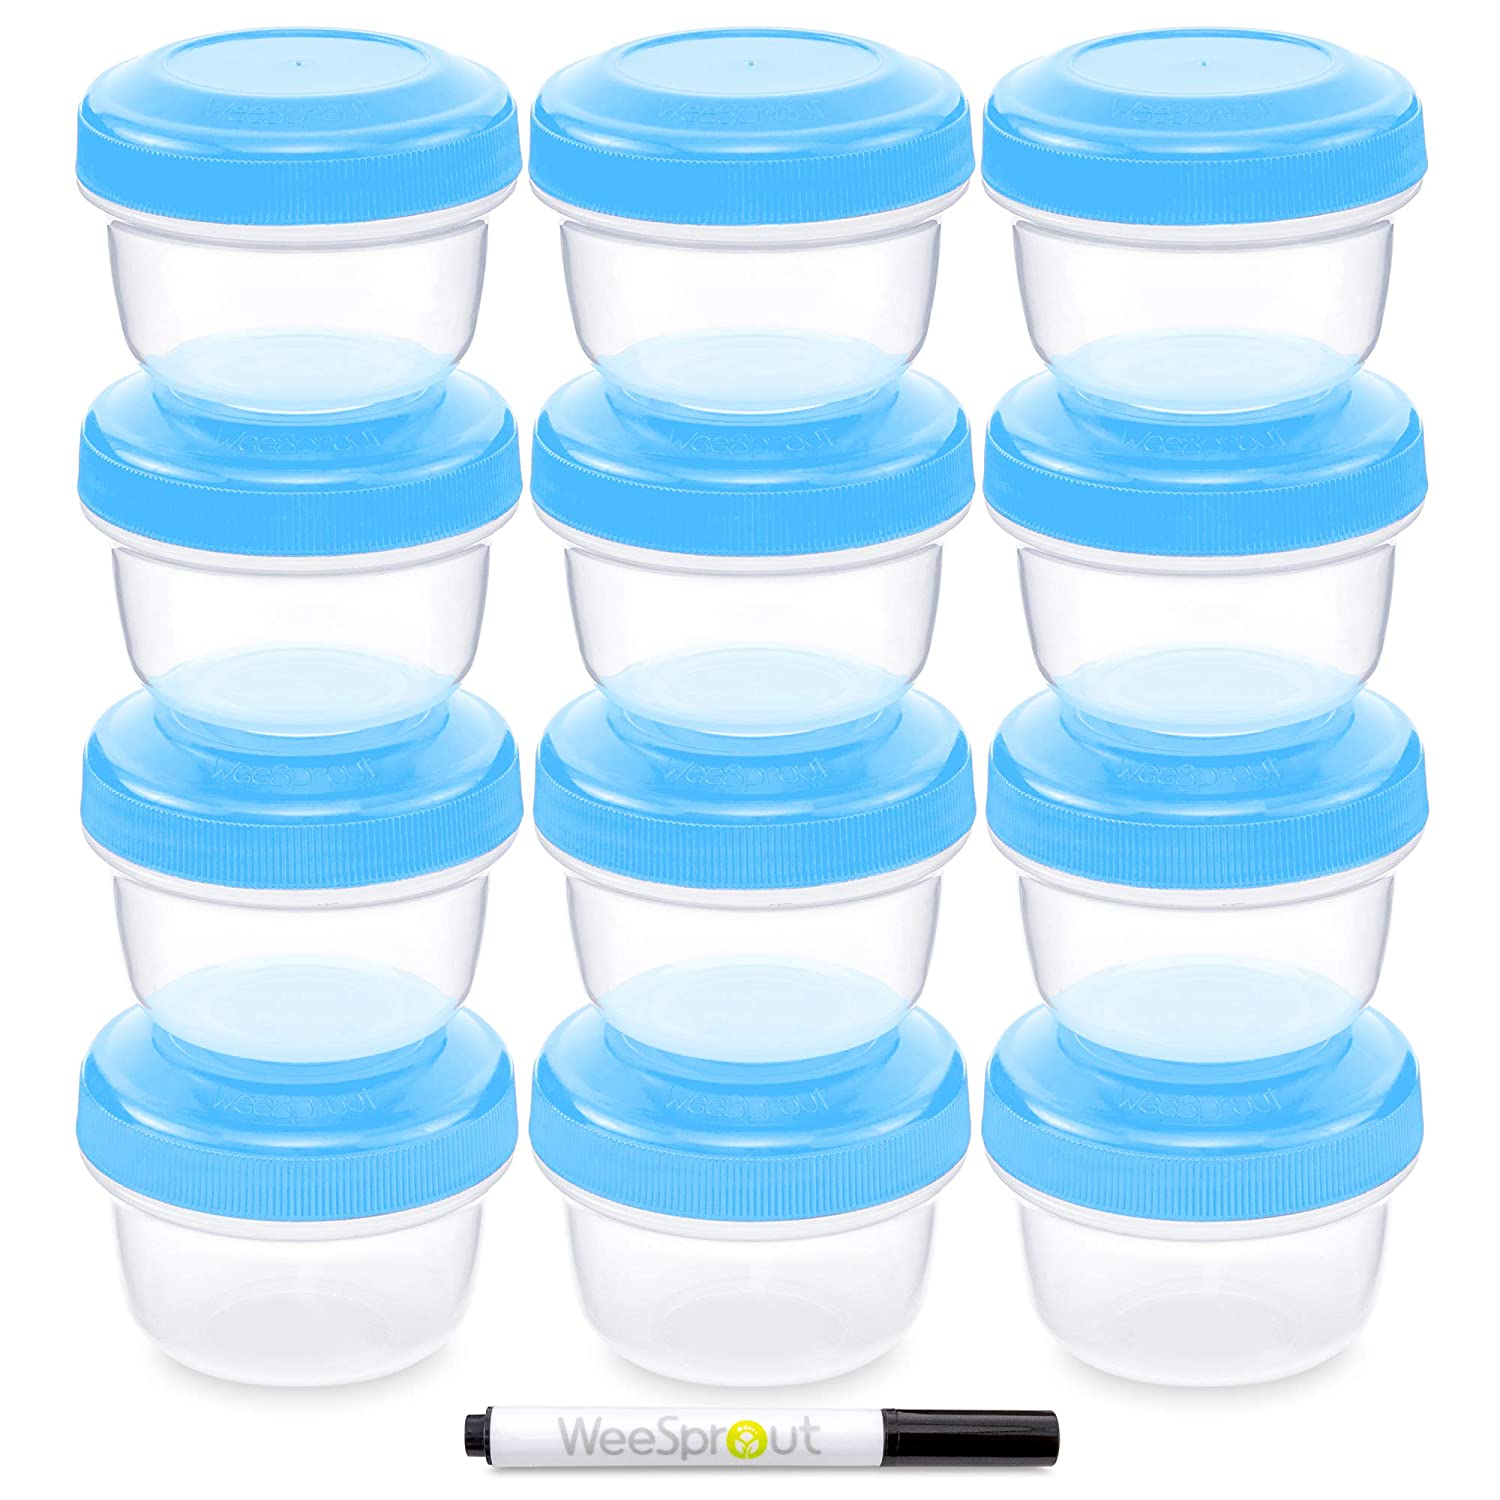 WEESPROUT Leakproof Baby Food Container Set, 12-Pack